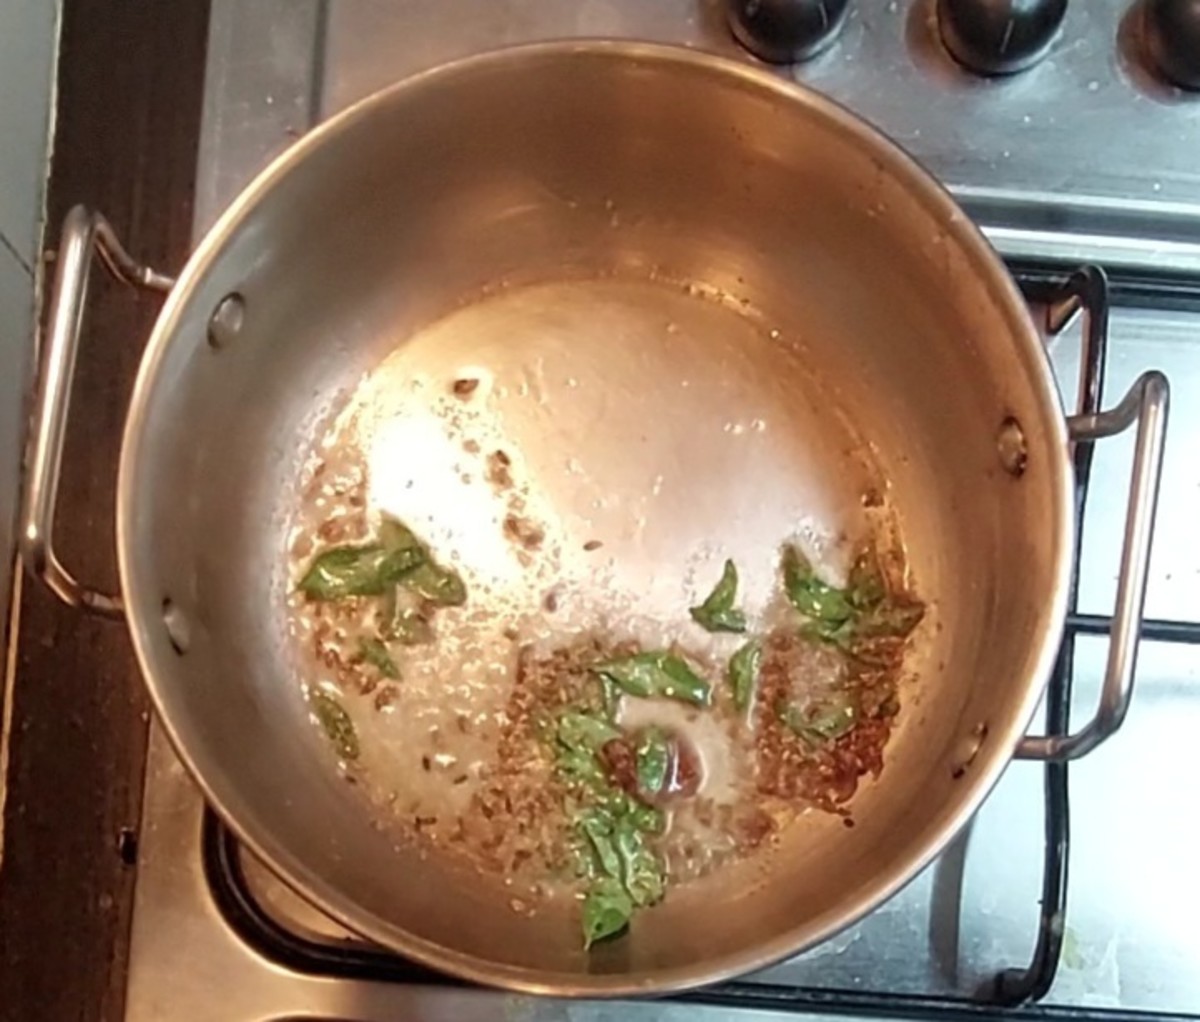 In a pan, heat 2 tablespoons oil and splutter 1/2 teaspoon cumin seeds. Add 2-inch-long piece of cinnamon, a sprig of curry leaves and 1/4 teaspoon hing (asafoetida). Saute for a few seconds.